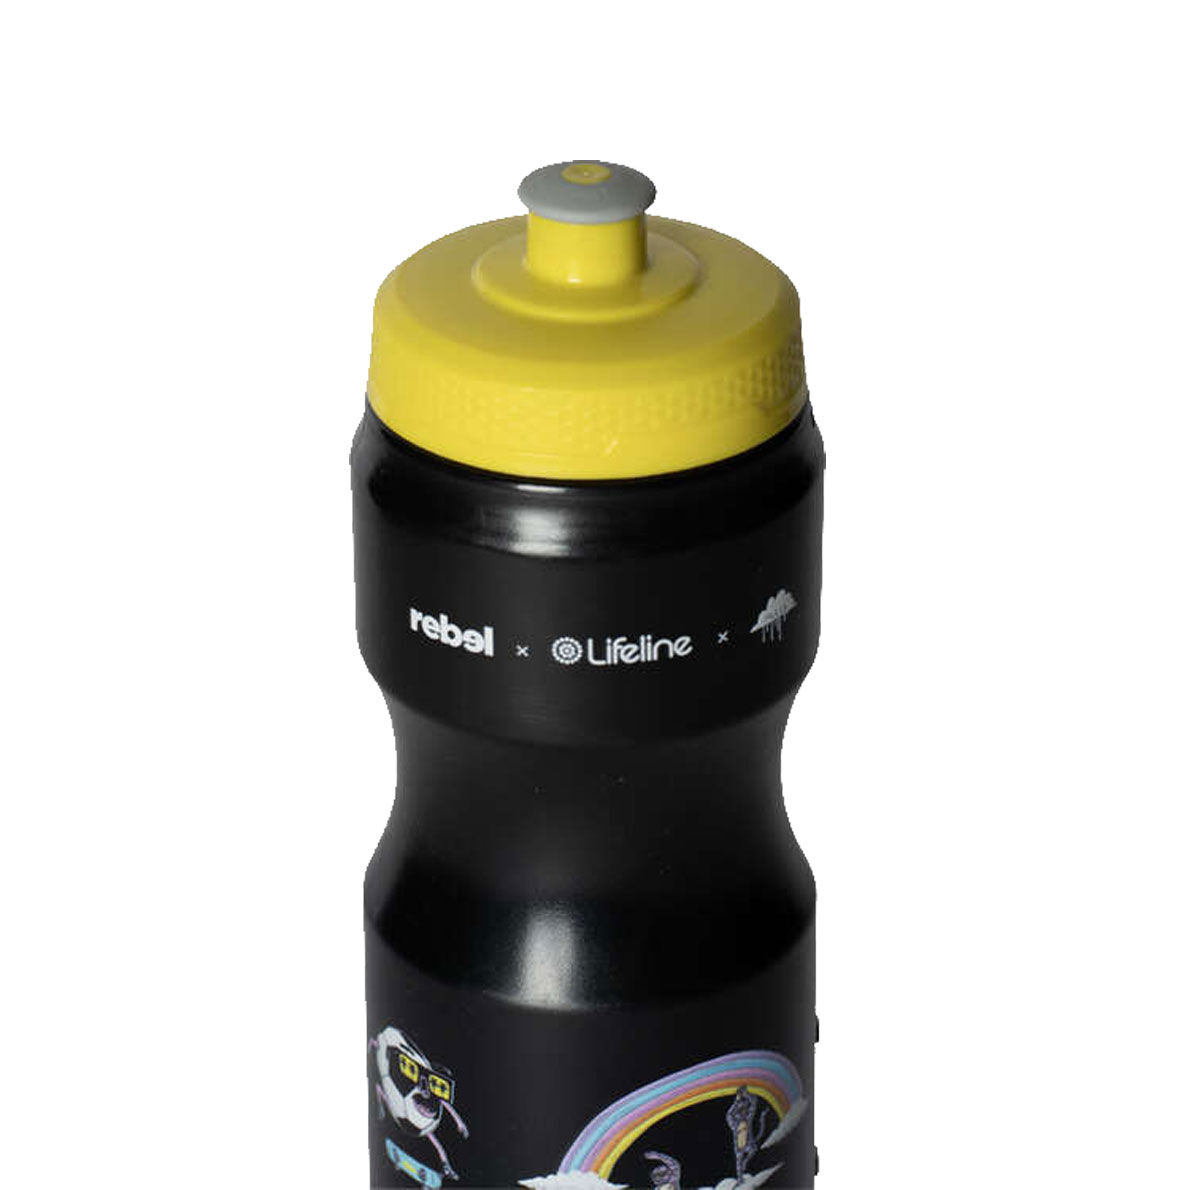 Indianapolis Colts Squeezy Water Bottle